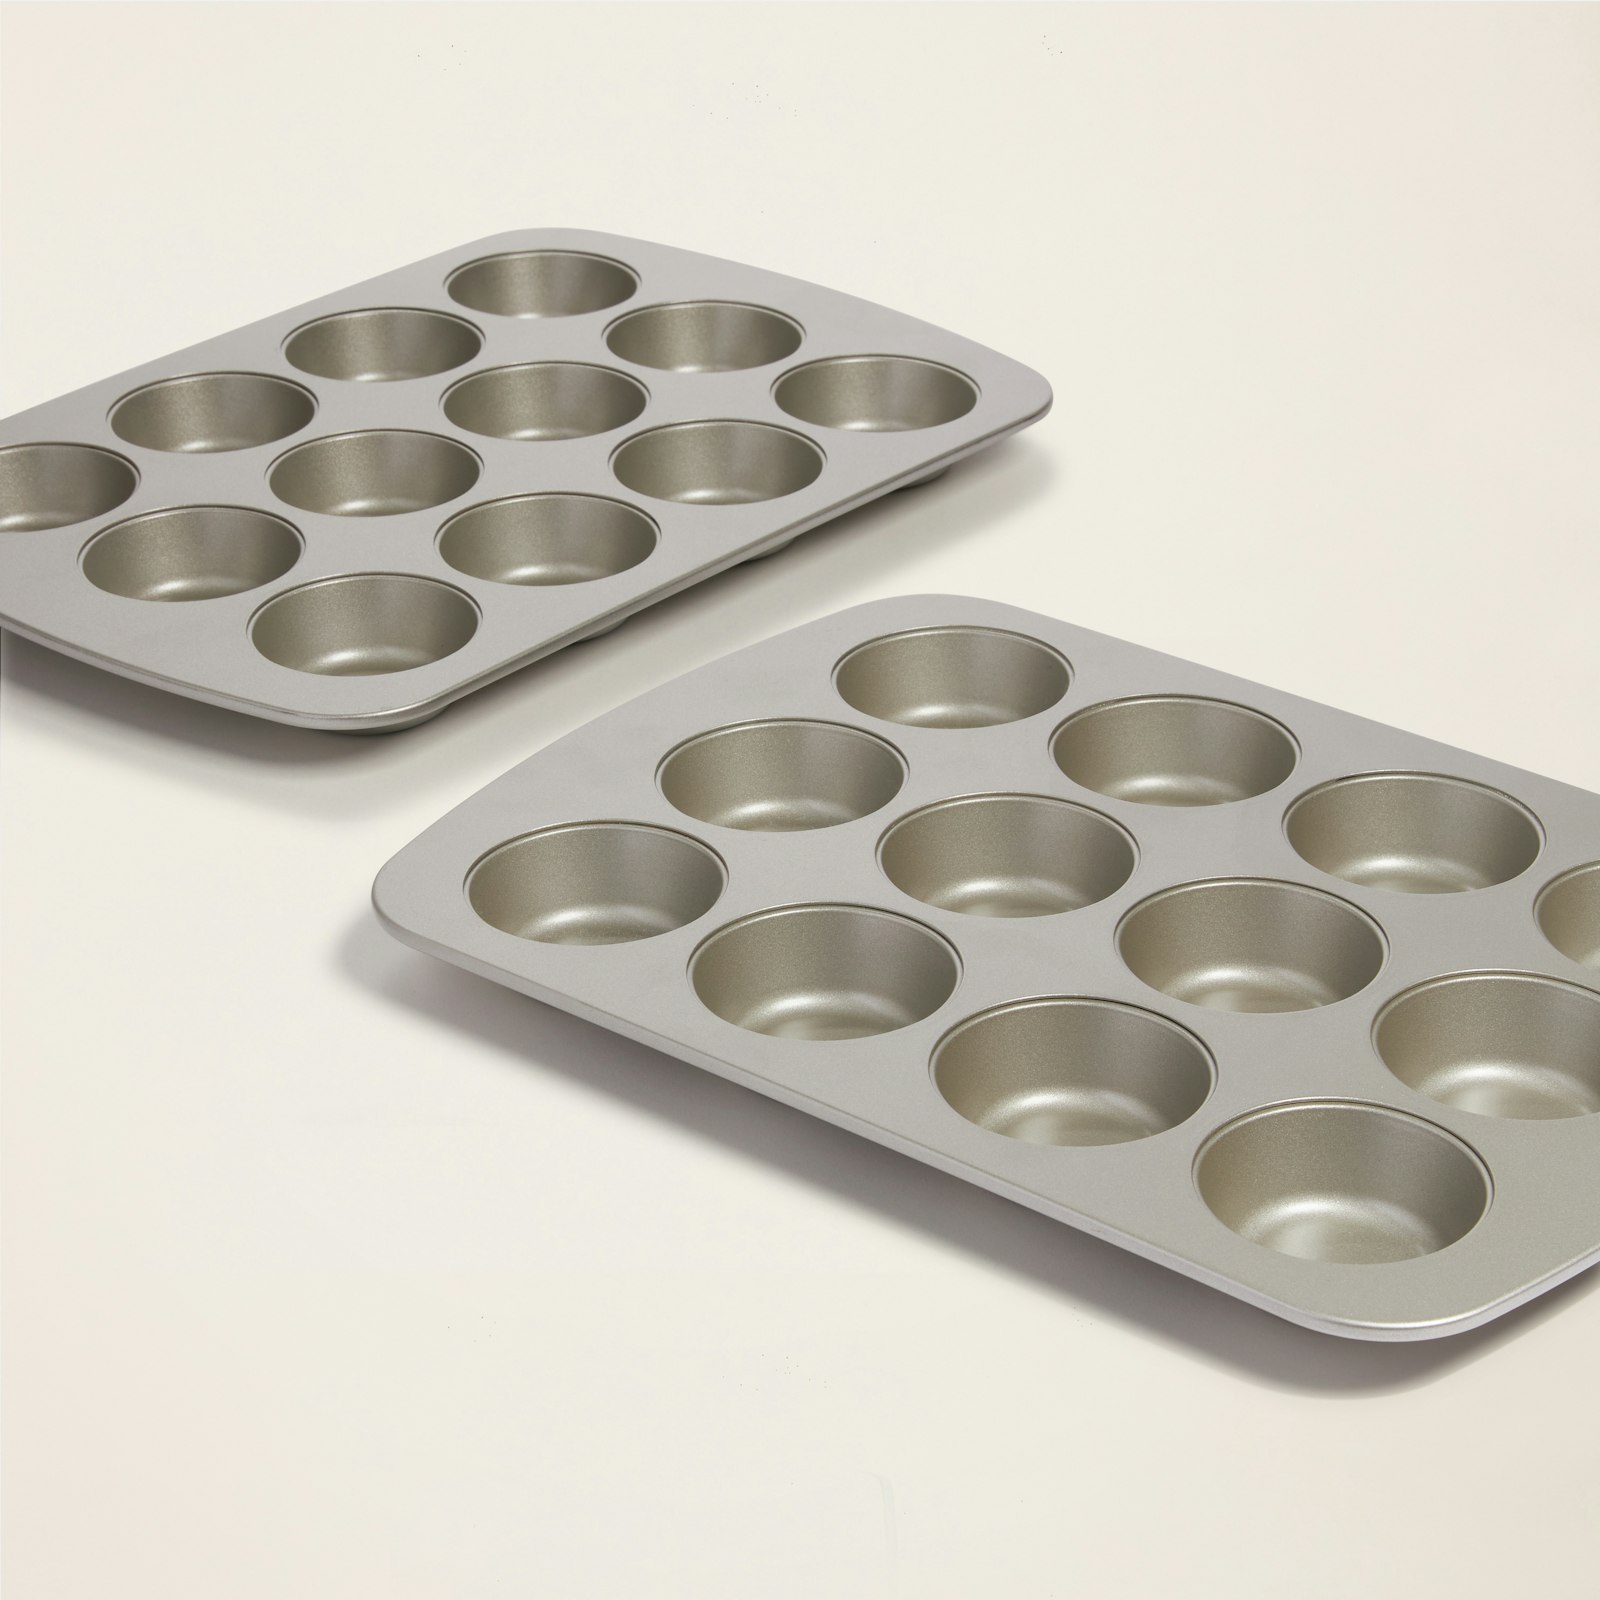 ZestMuffinTins_Silver_12Count_2Set_Product_1x1_0159.jpg